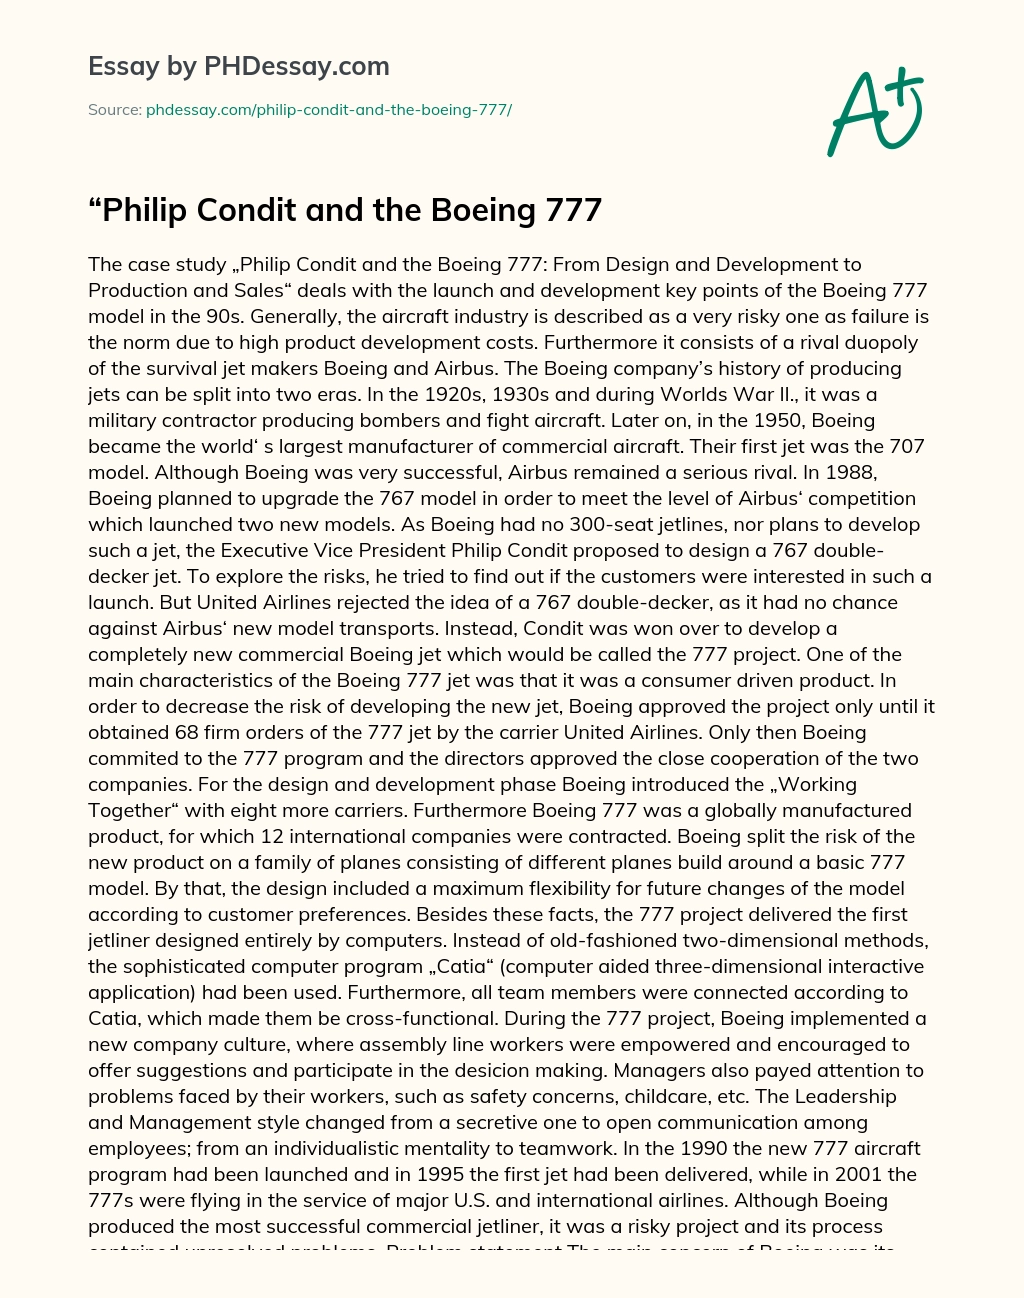 Philip Condit and the Boeing 777 essay